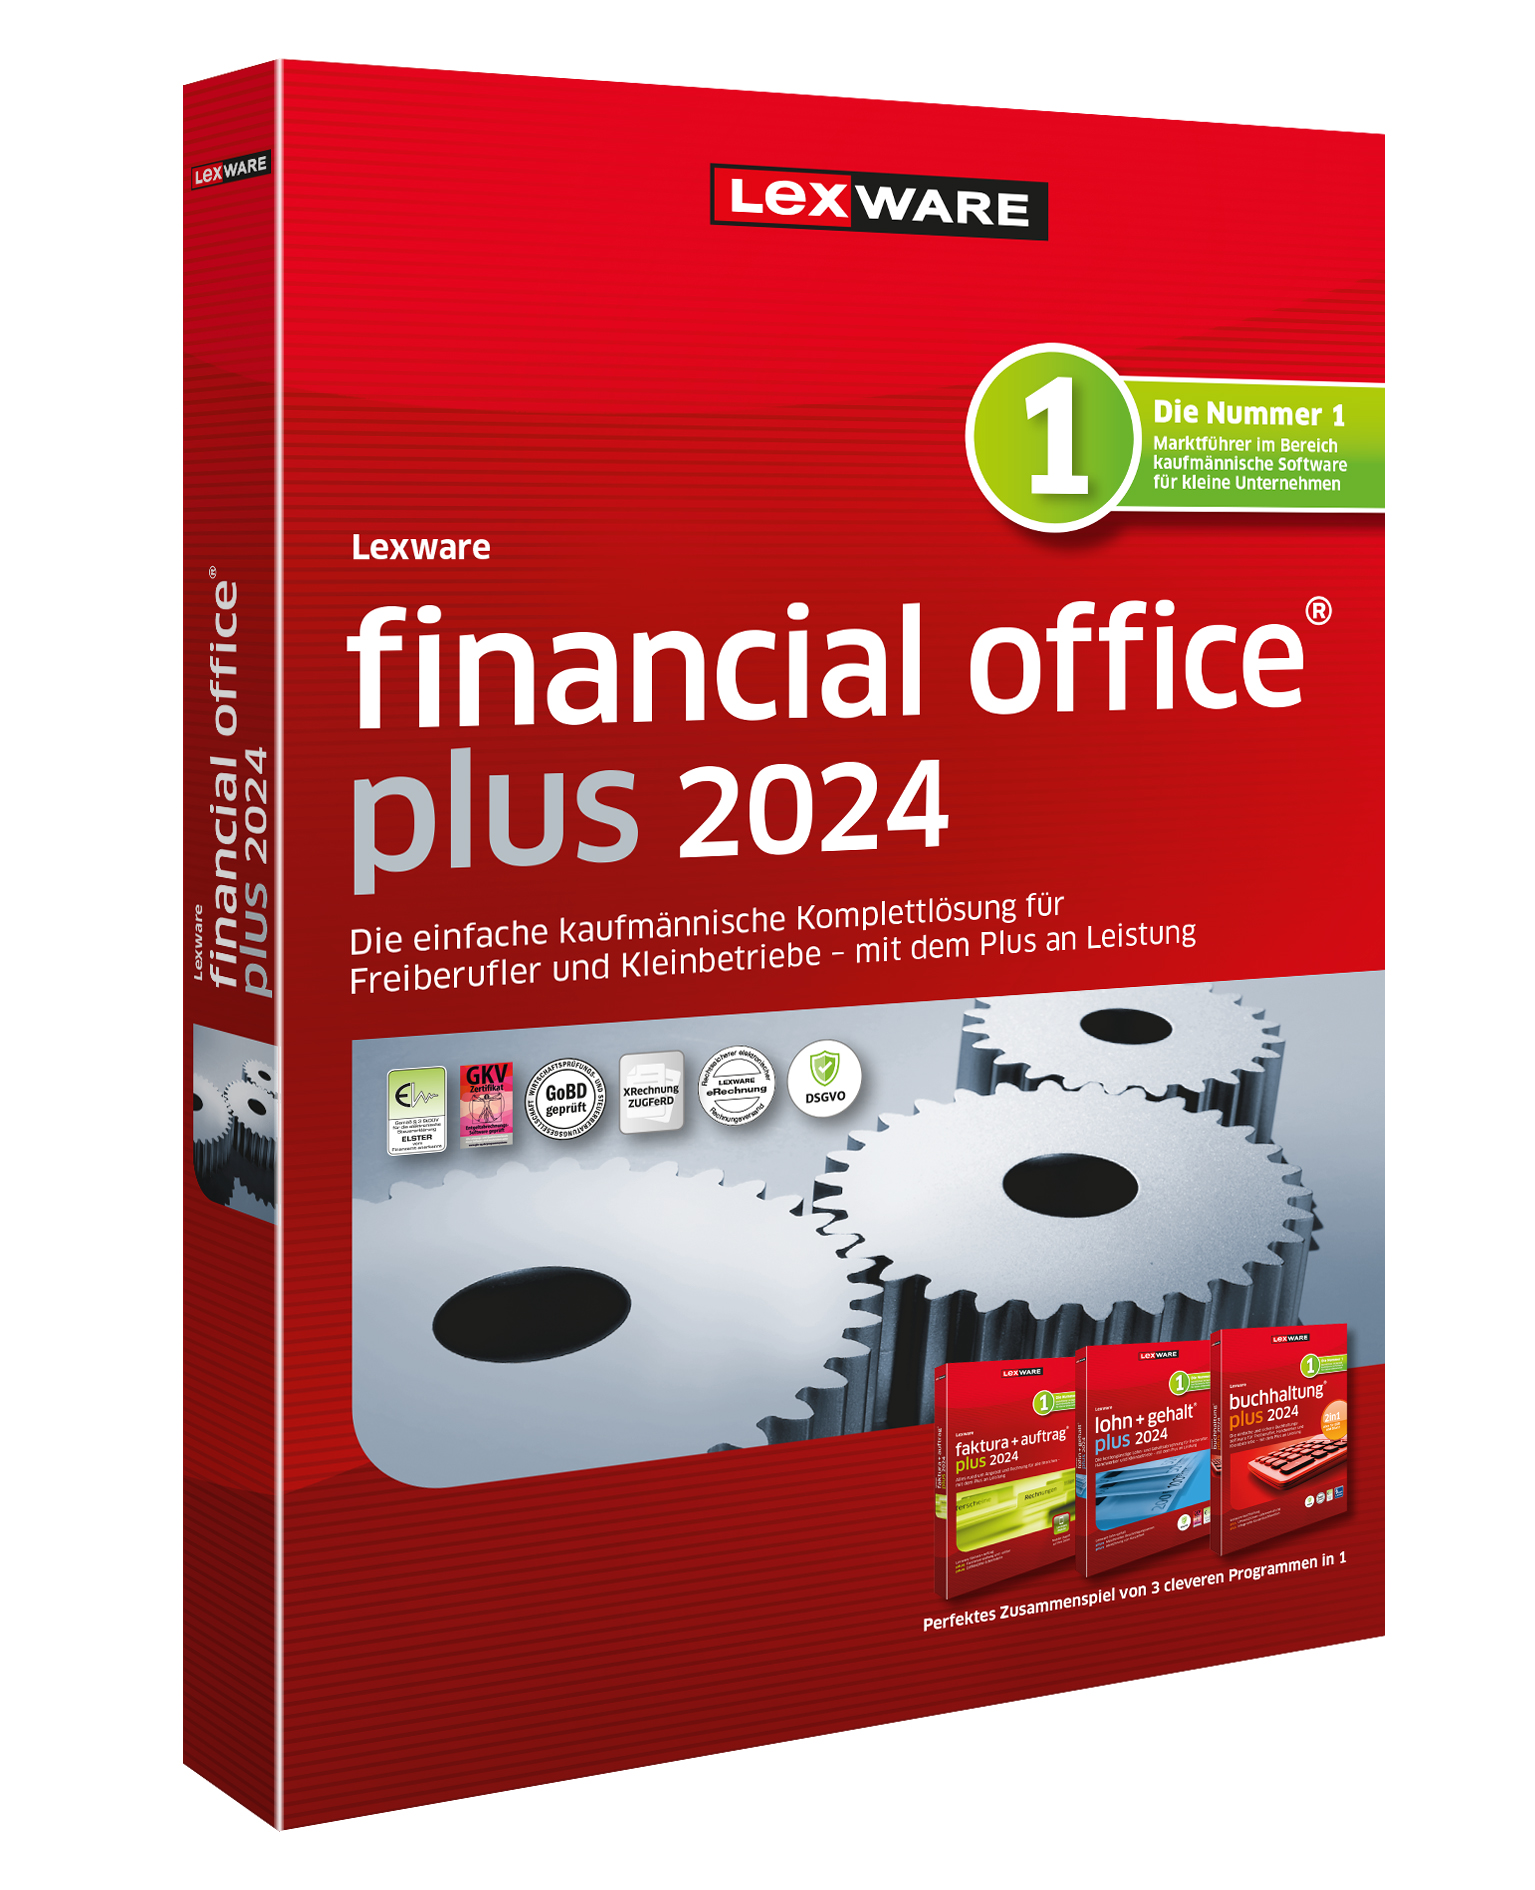 Lexware Lexware financial office plus it-structures gmbh